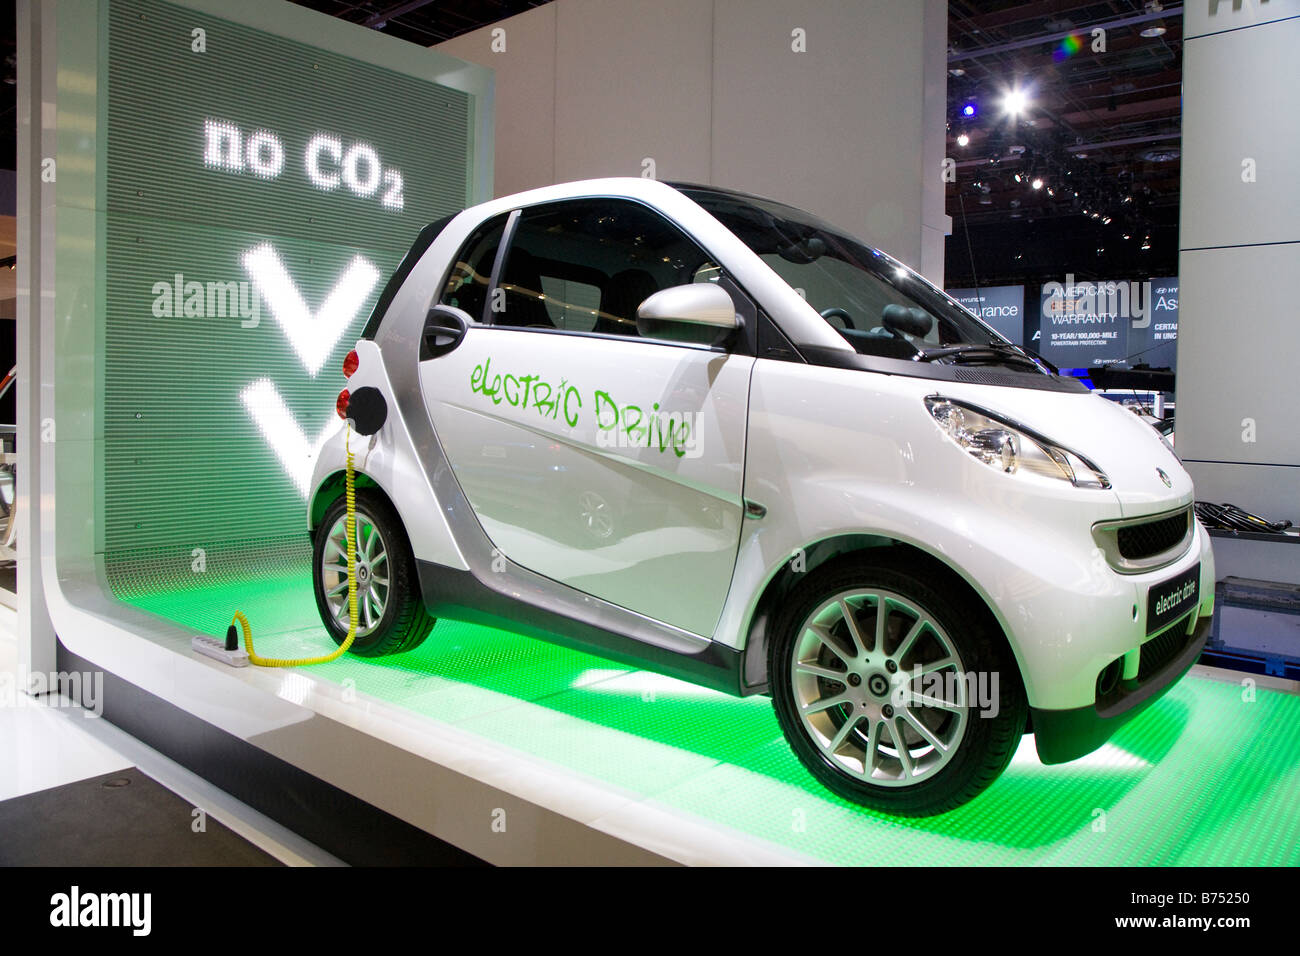 Detroit Michigan The Smart electric car on display at the North American International Auto Show Stock Photo